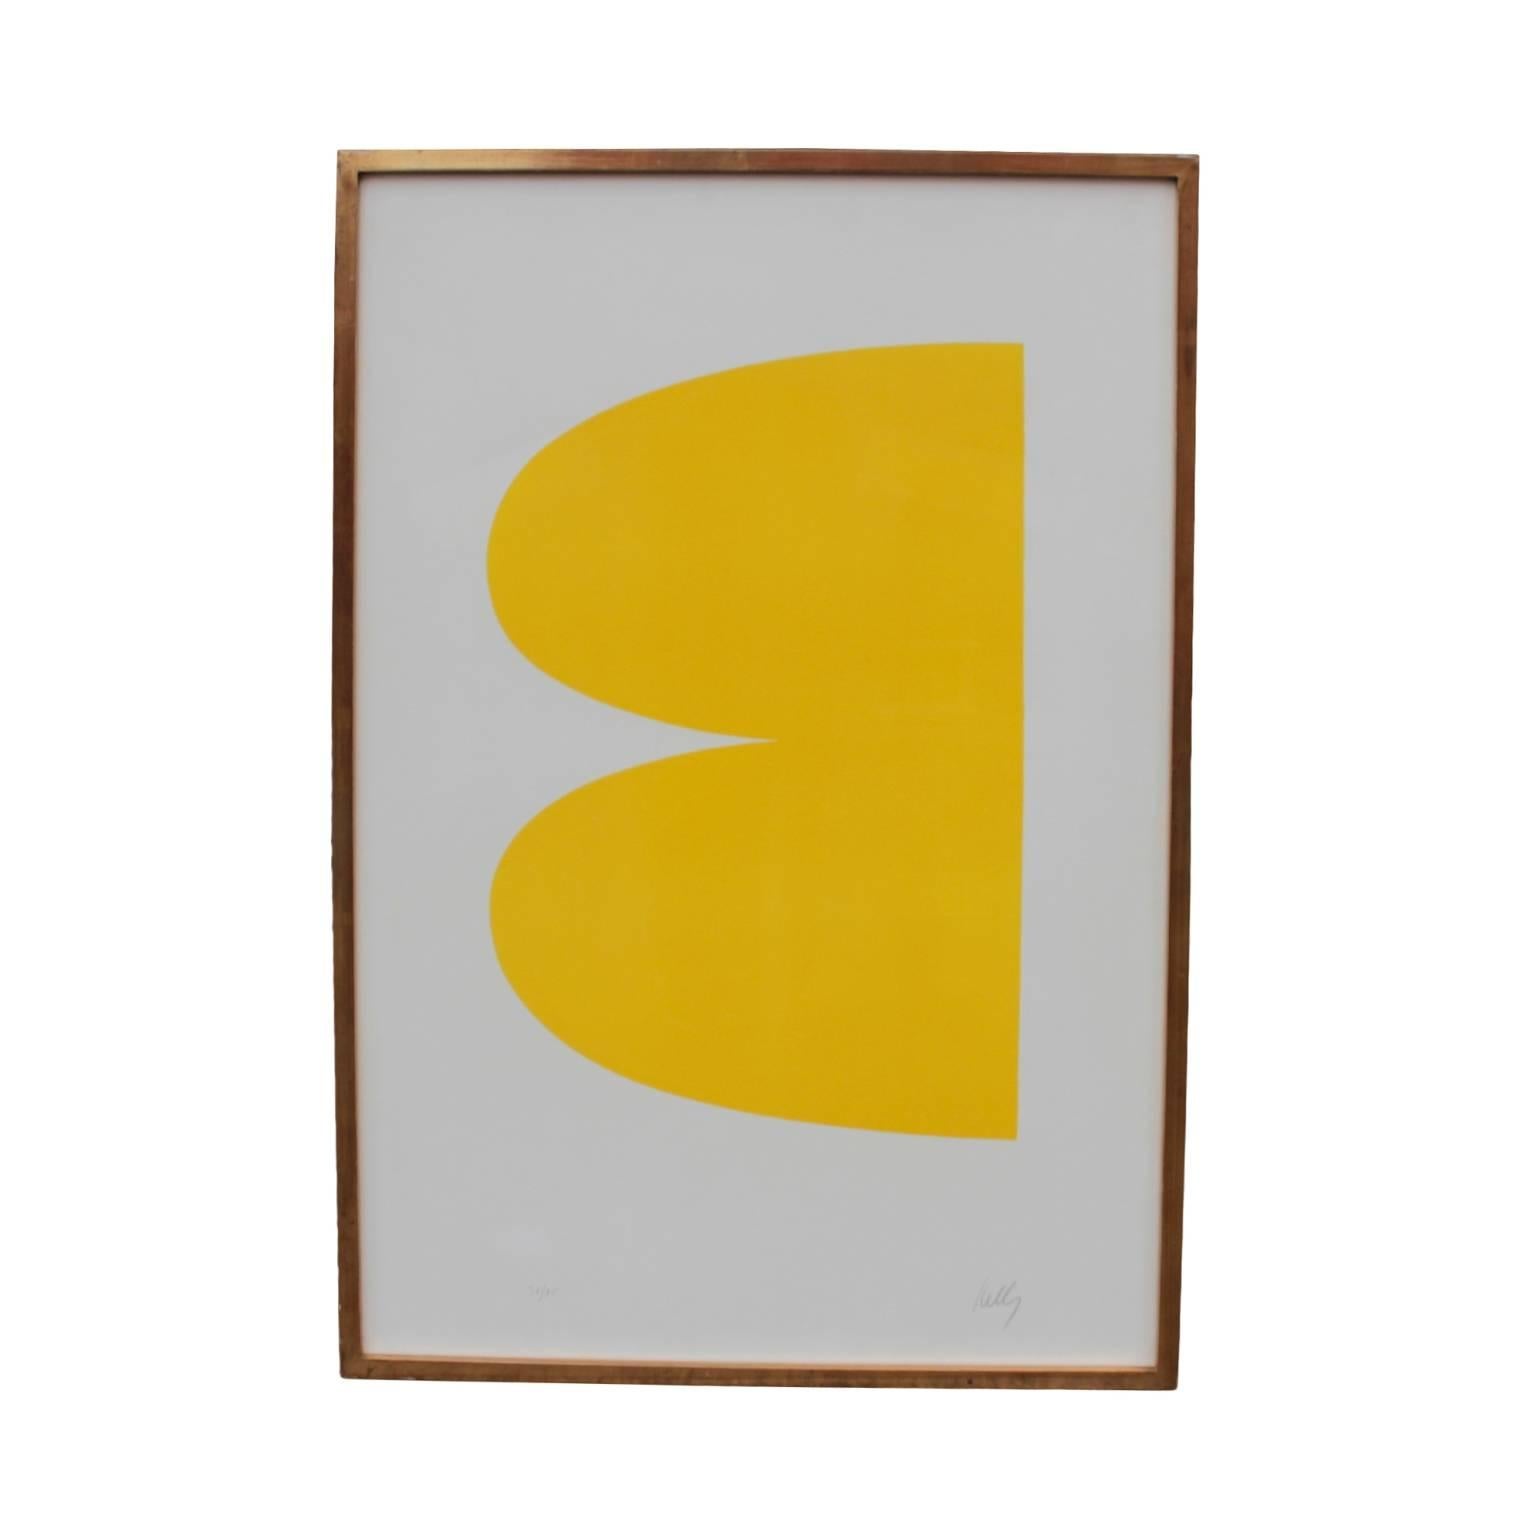 Two lithographs by Ellsworth Kelly (1923-2015), sold as a pair. Both numbered and signed on recto, in their original French gilt frames with brand new museum glass. From a suite of 27 color lithographs created in Paris early in Kelly's career,